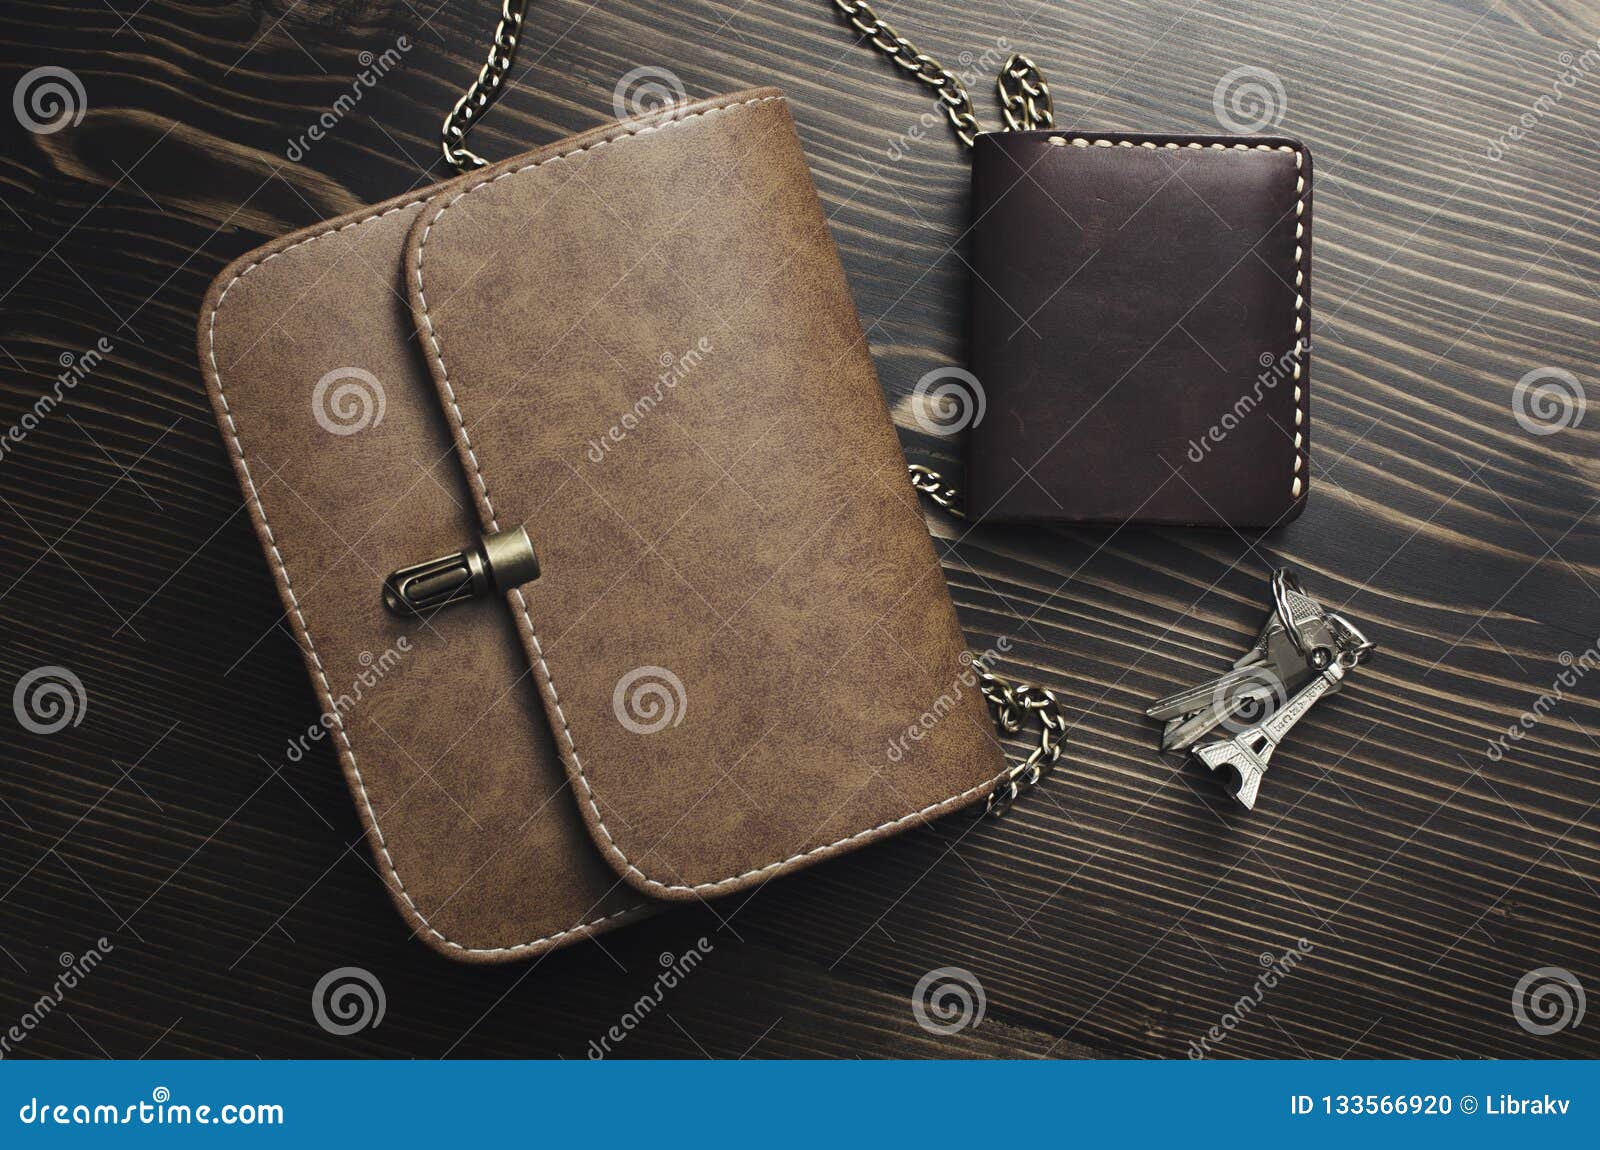 Contents of woman`s bag on wooden background